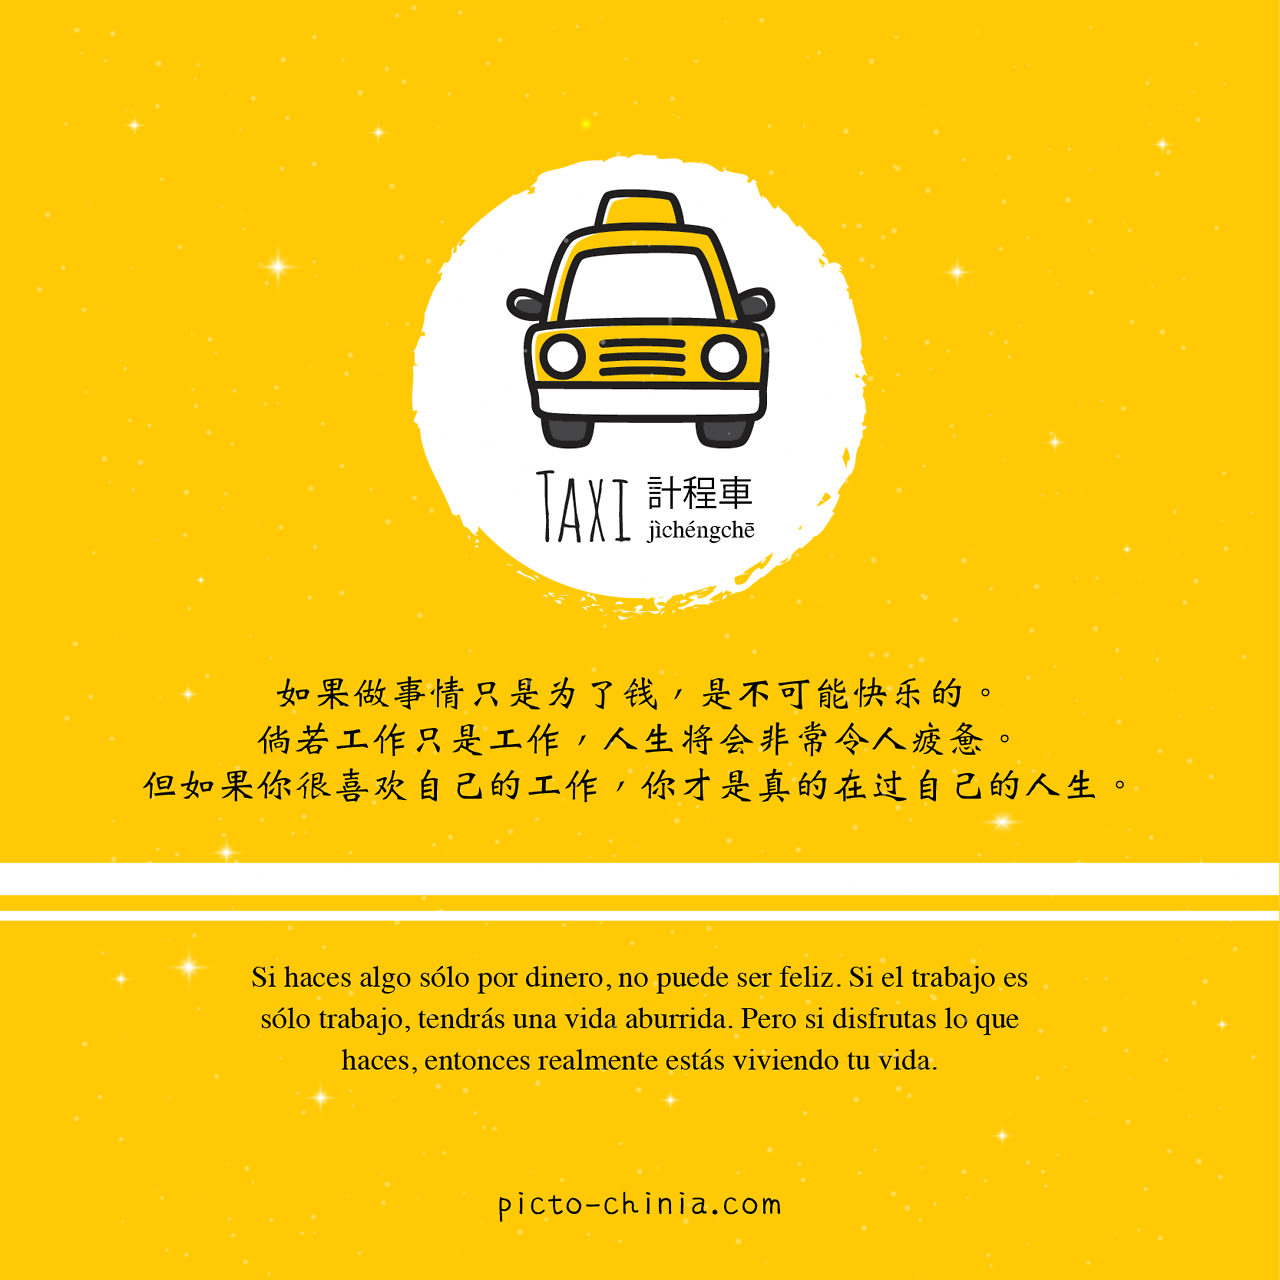 taxi driver stories taxi driver chinese quotes Taiwan I love Taiwan pictochinia tumblr